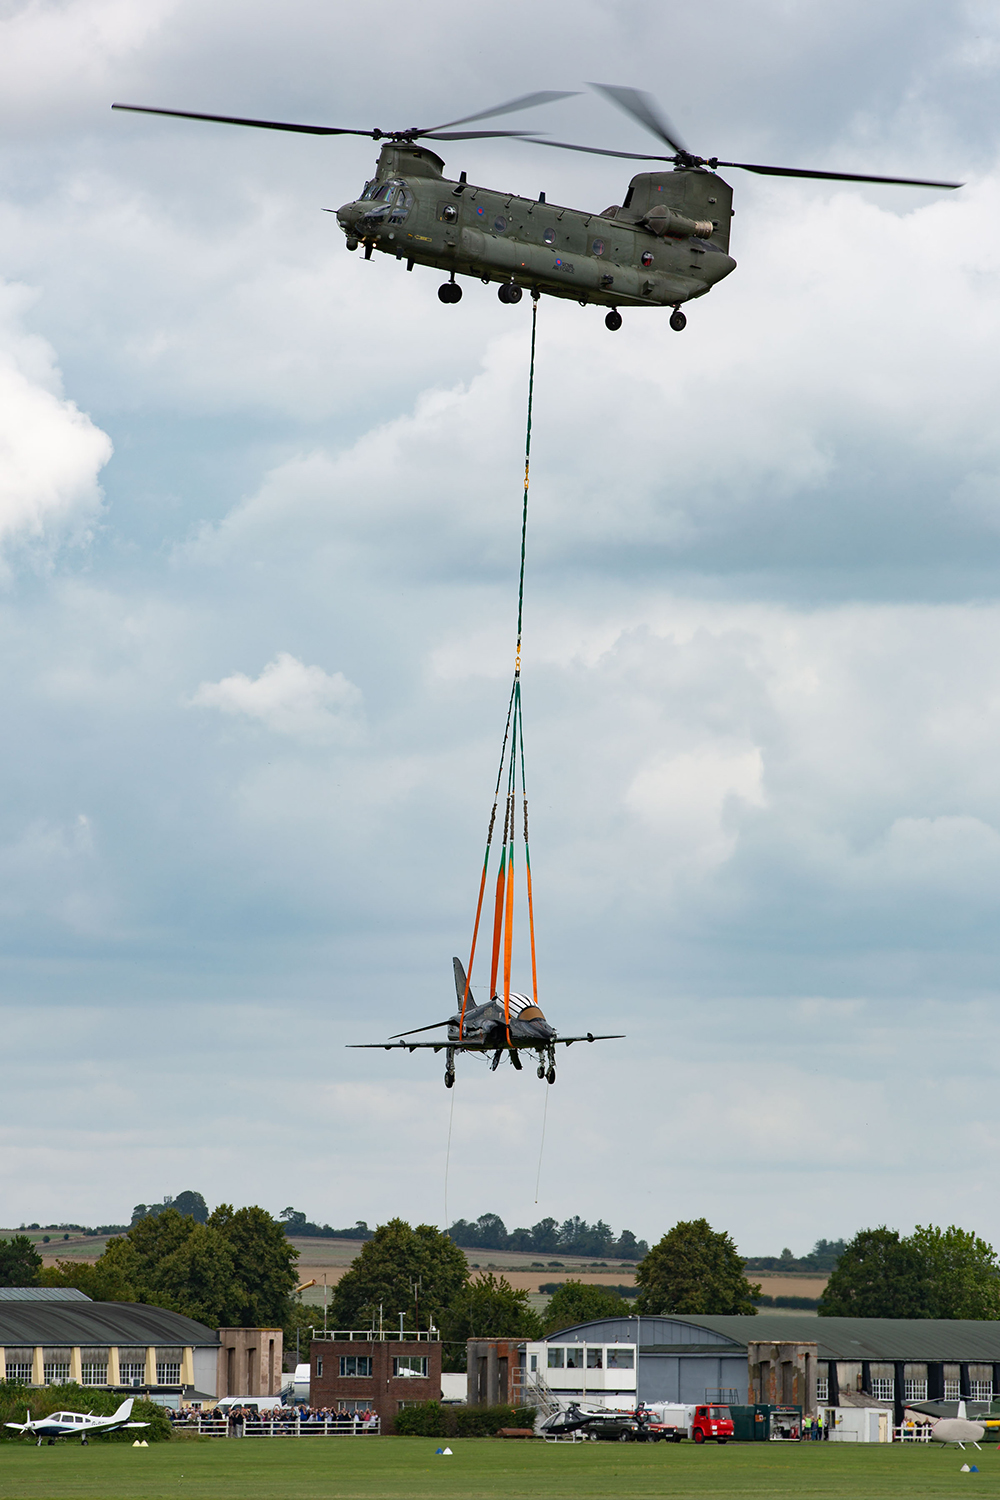 The T1 Hawk arrives over Old Sarum airfield, underslung from a No. 27 Squadron Chinook, based at RAF Odiham